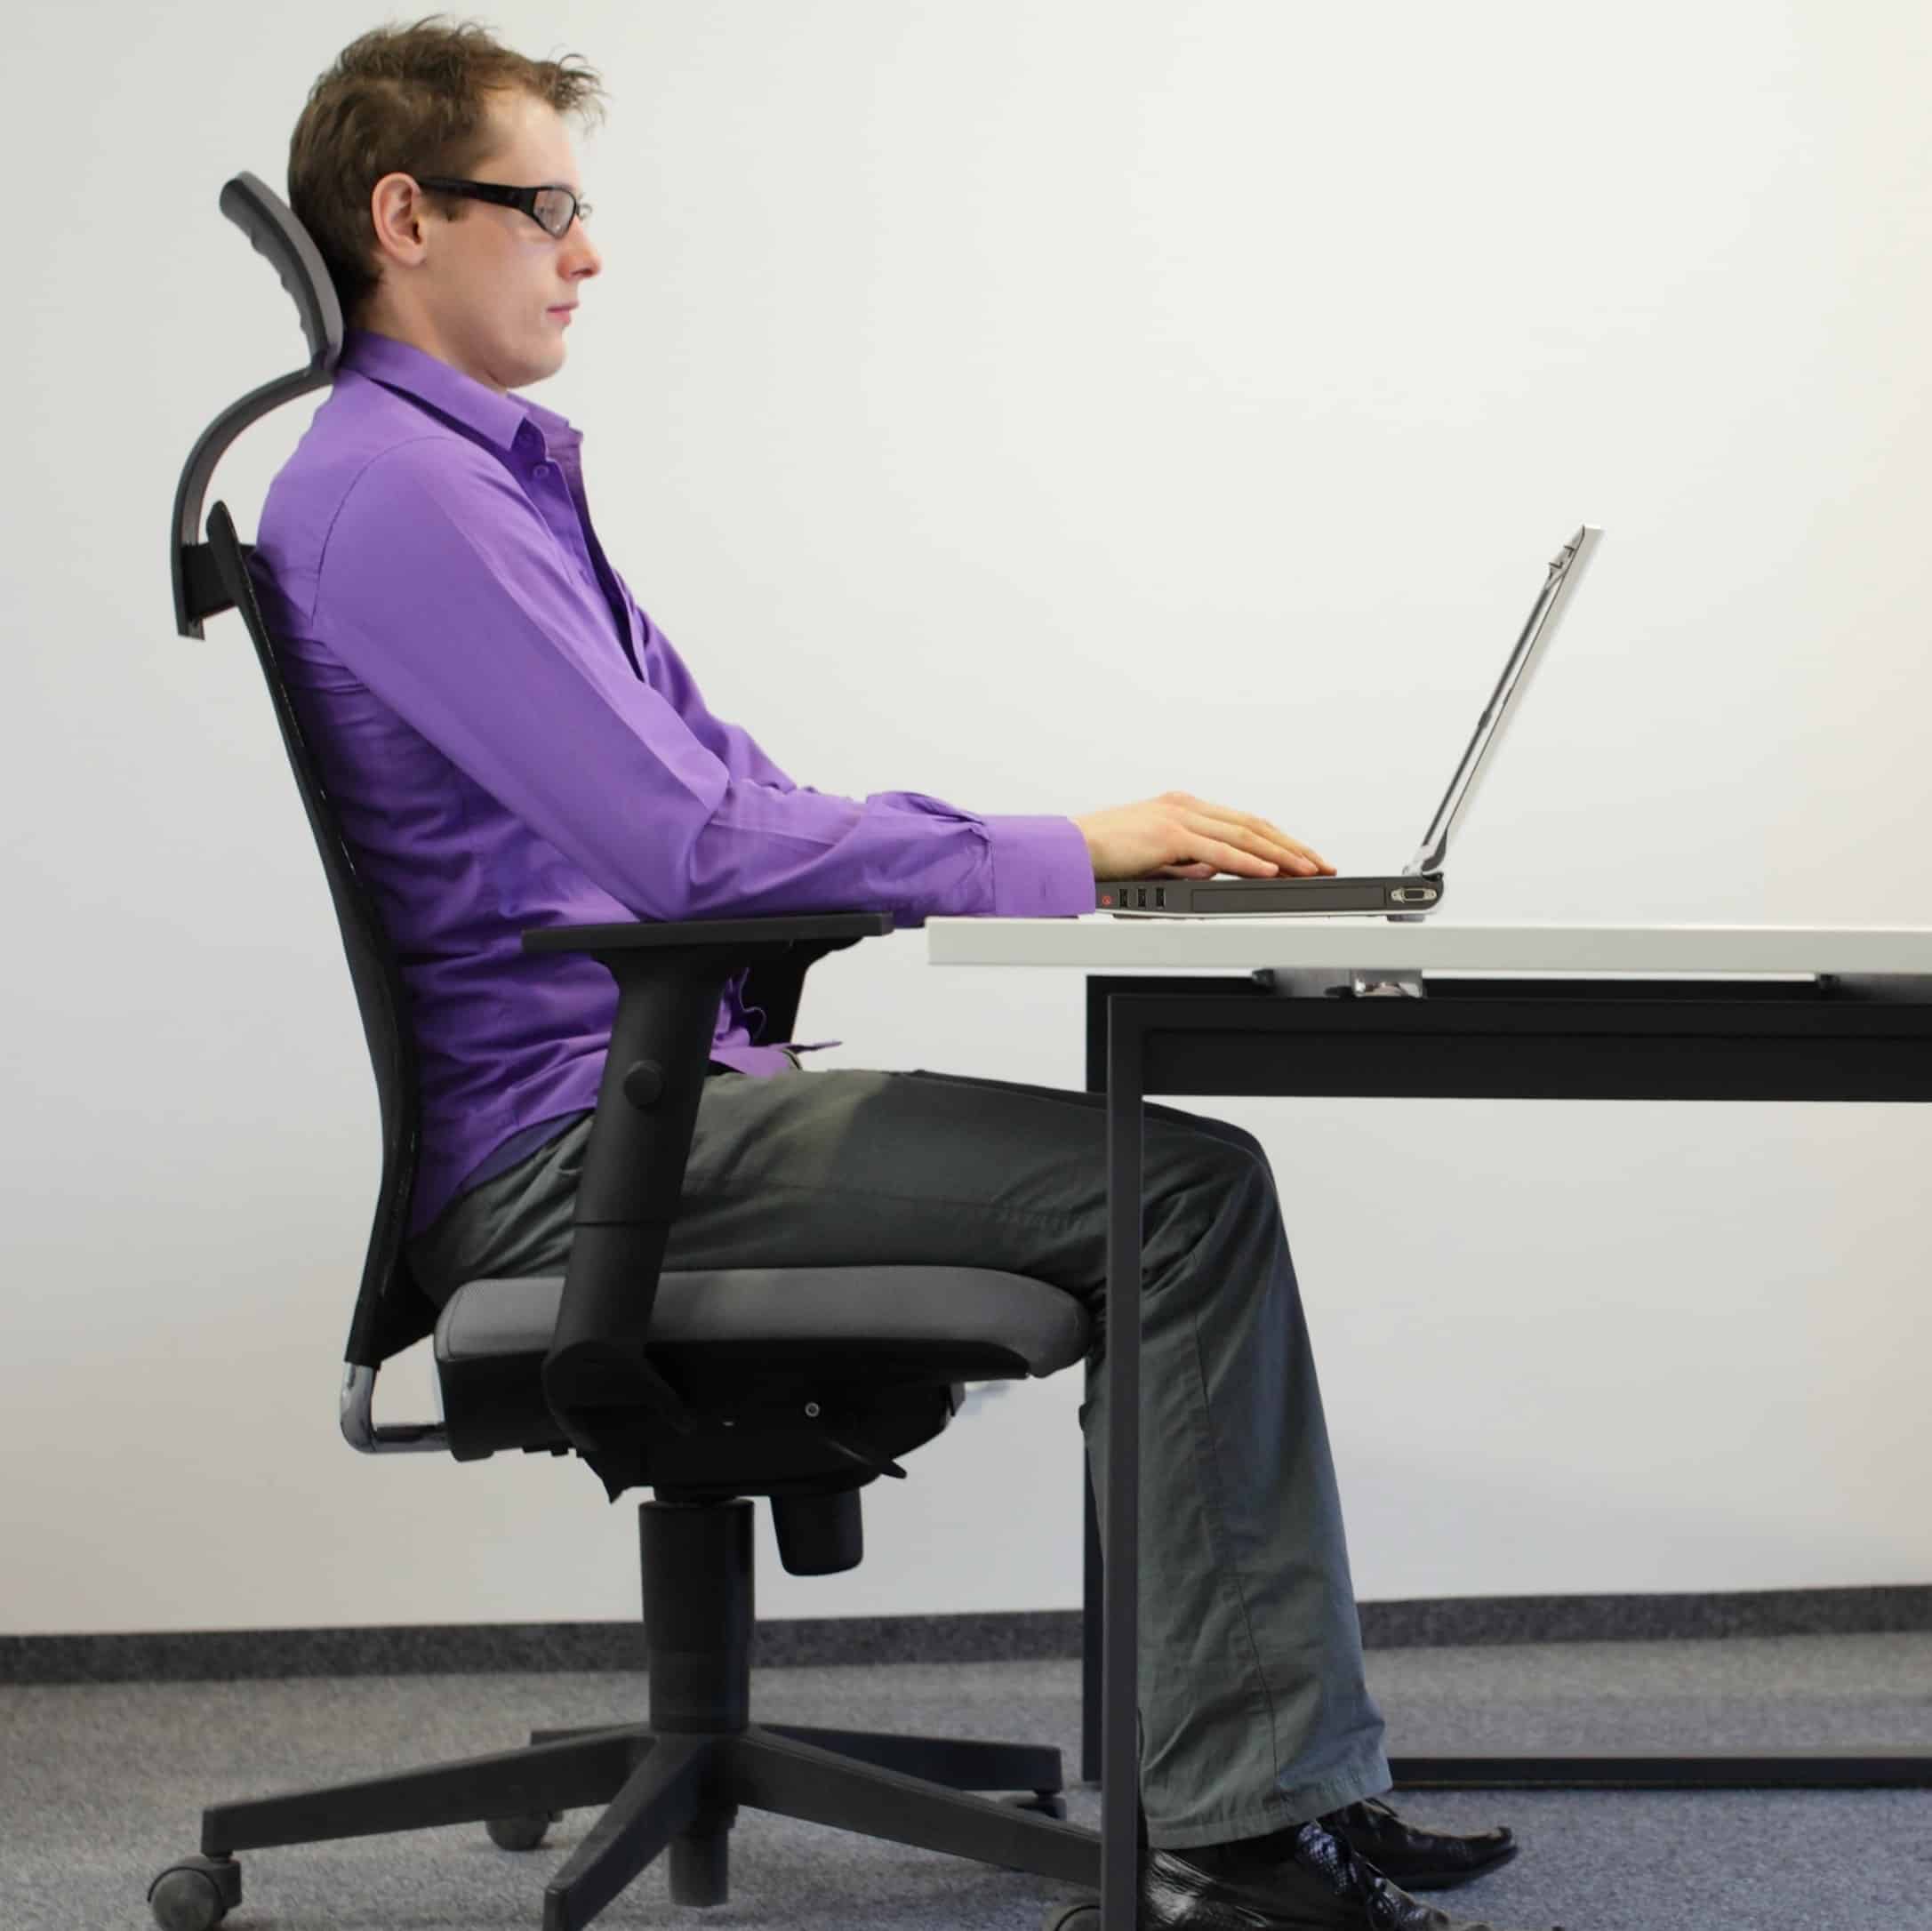 Image of man in office sat correctly for Learn Q Debunking Common UK Health and Safety Myths blog